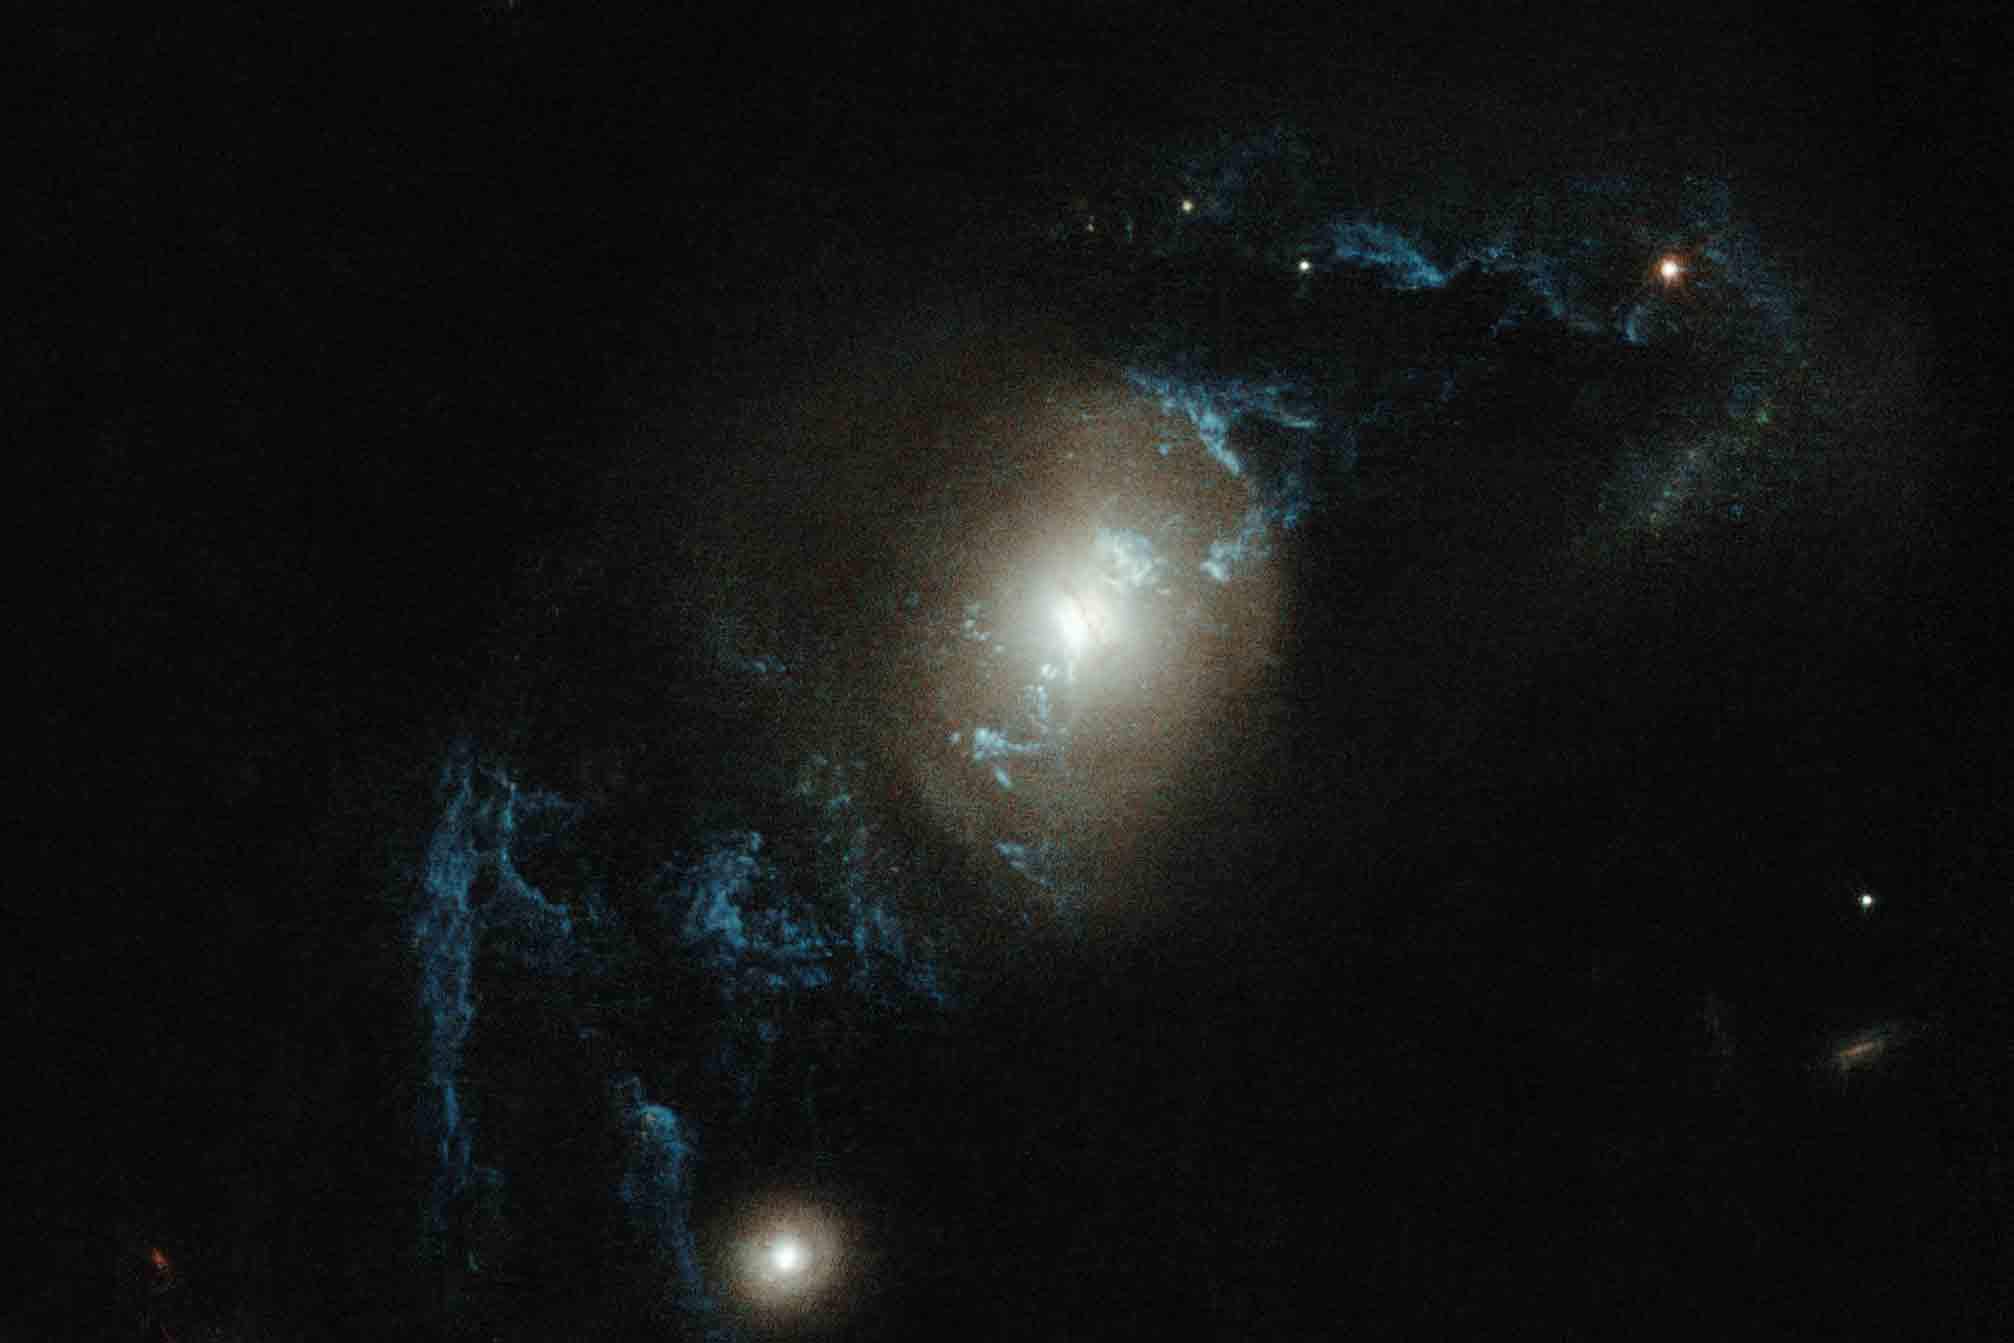 Ionized gas stretching out from it for thousands of light years